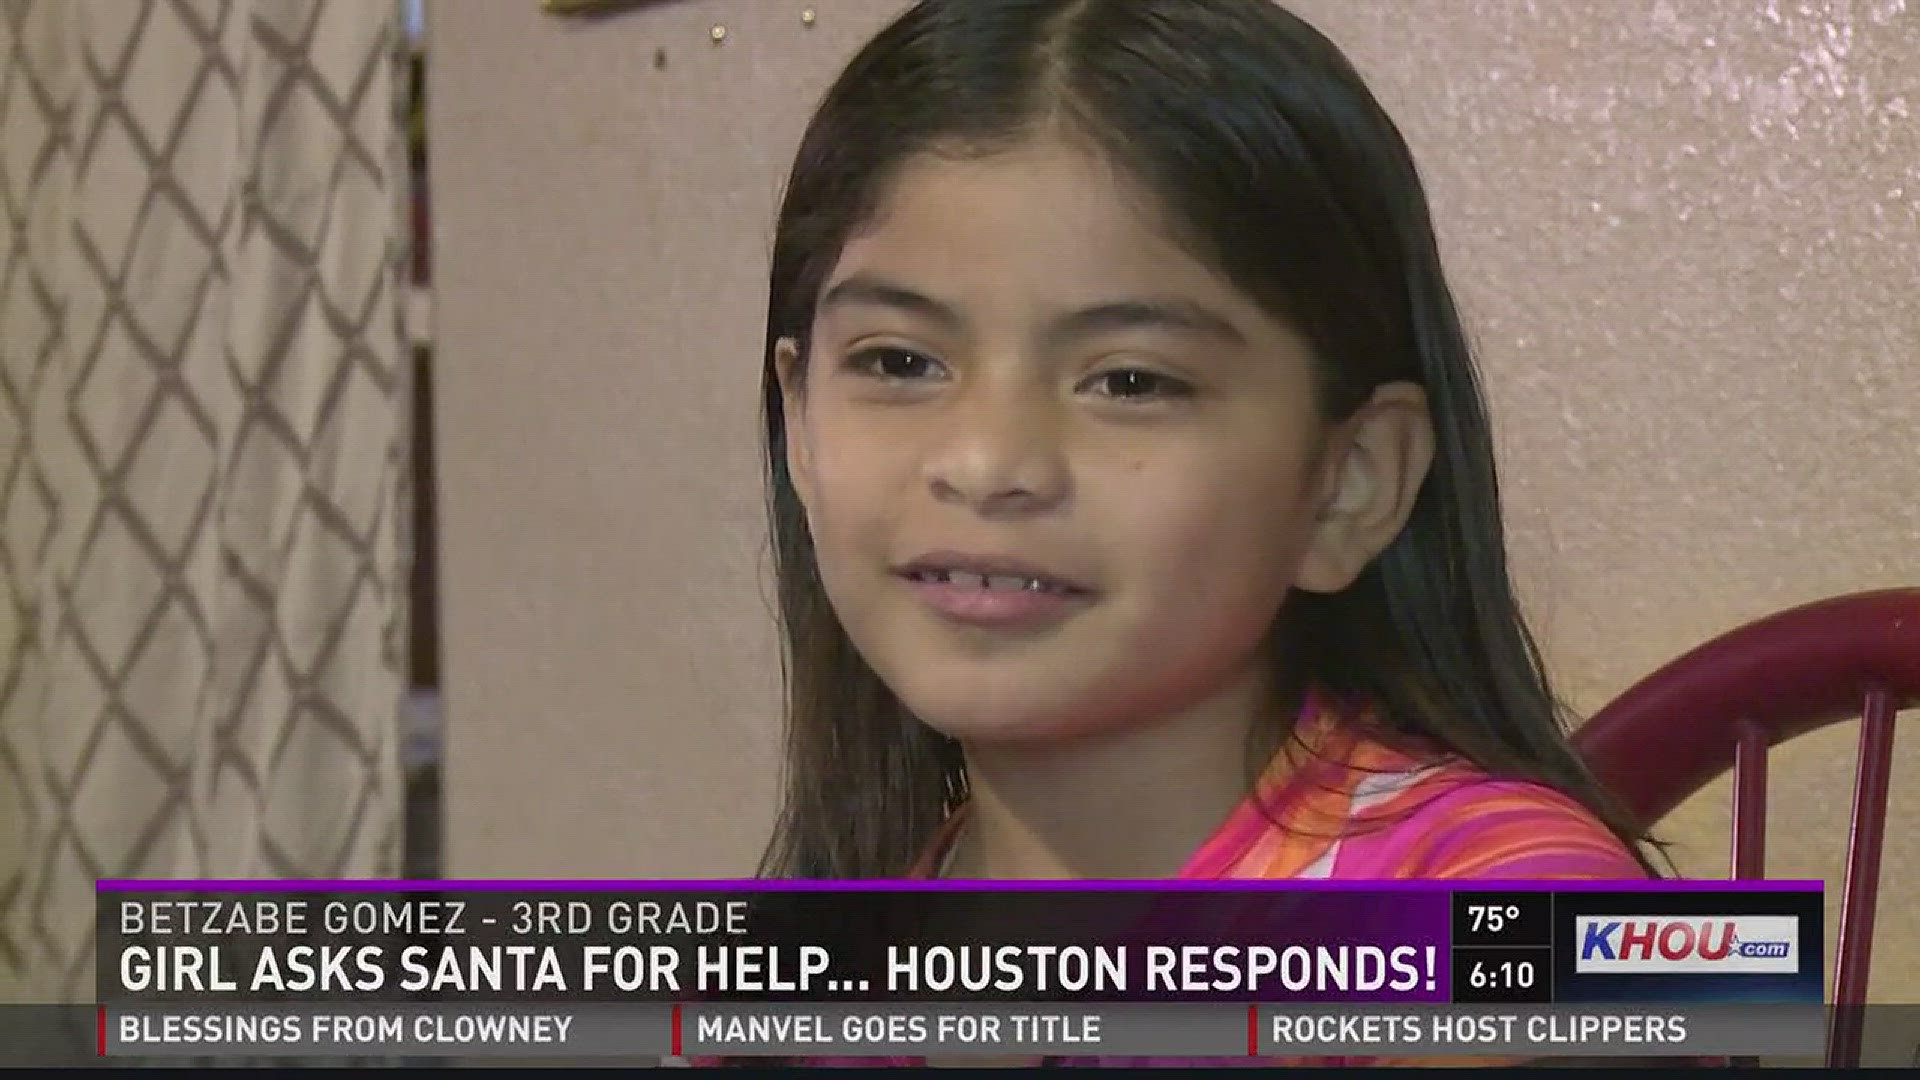 After writing a touching letter to Santa, members of the community are coming together for an 8 year old and her family who have been hit hard by Hurricane Harvey.